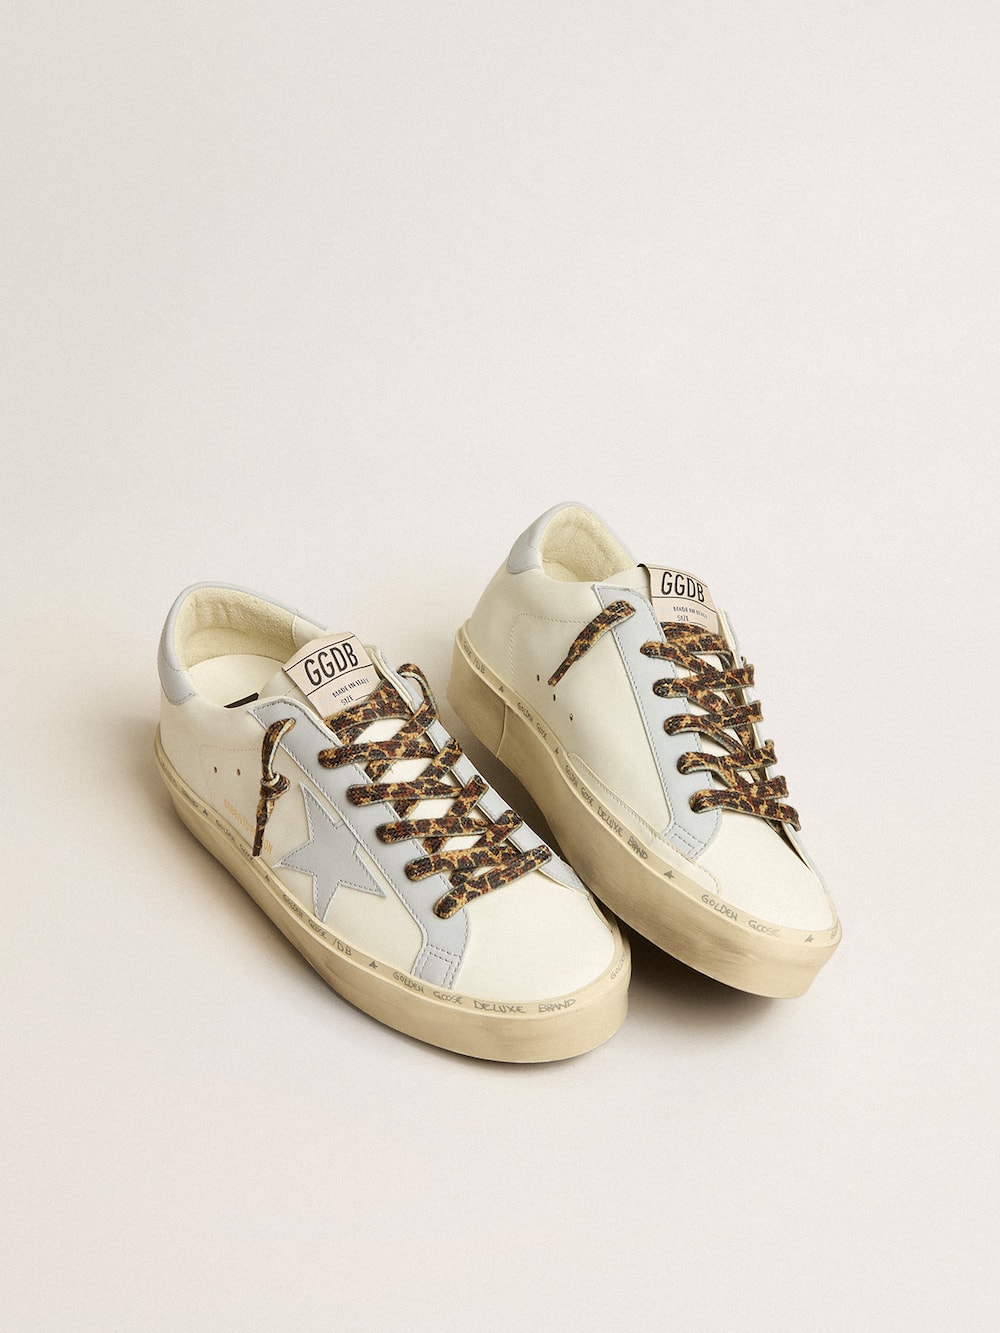 Golden Goose - Hi Star LTD in leather with light blue leather star and heel tab in 